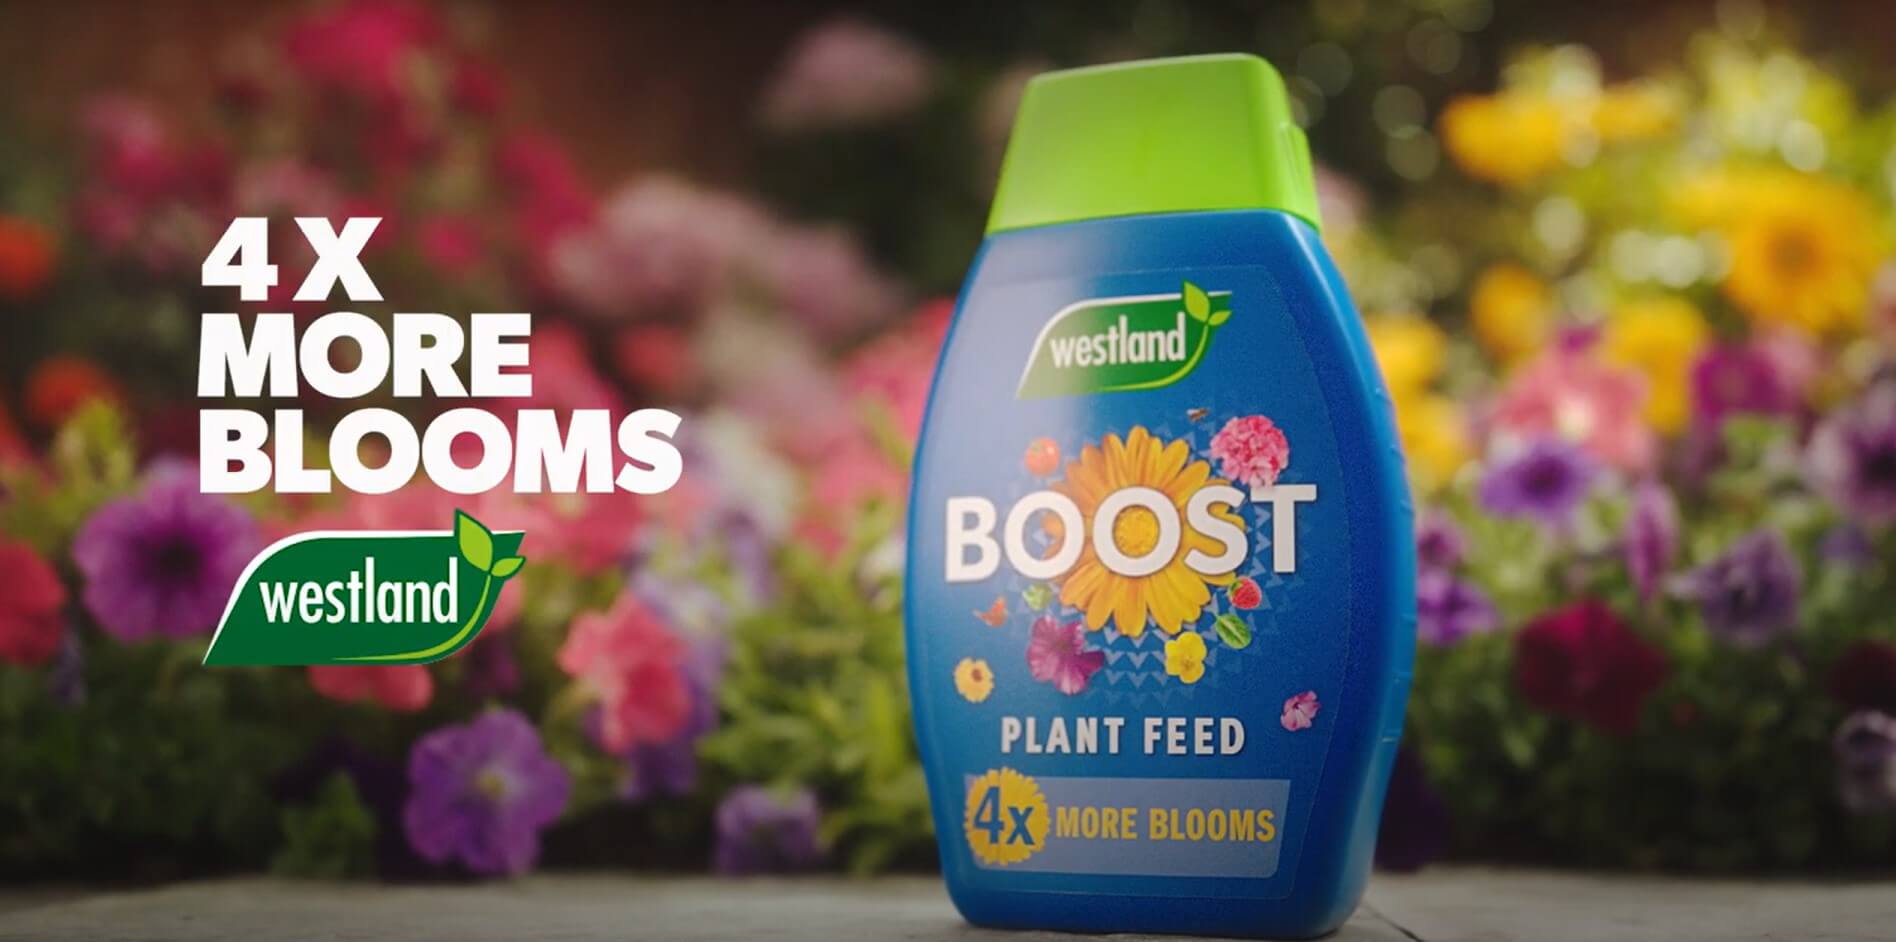 Boost plant feed returns to TV for Spring Season